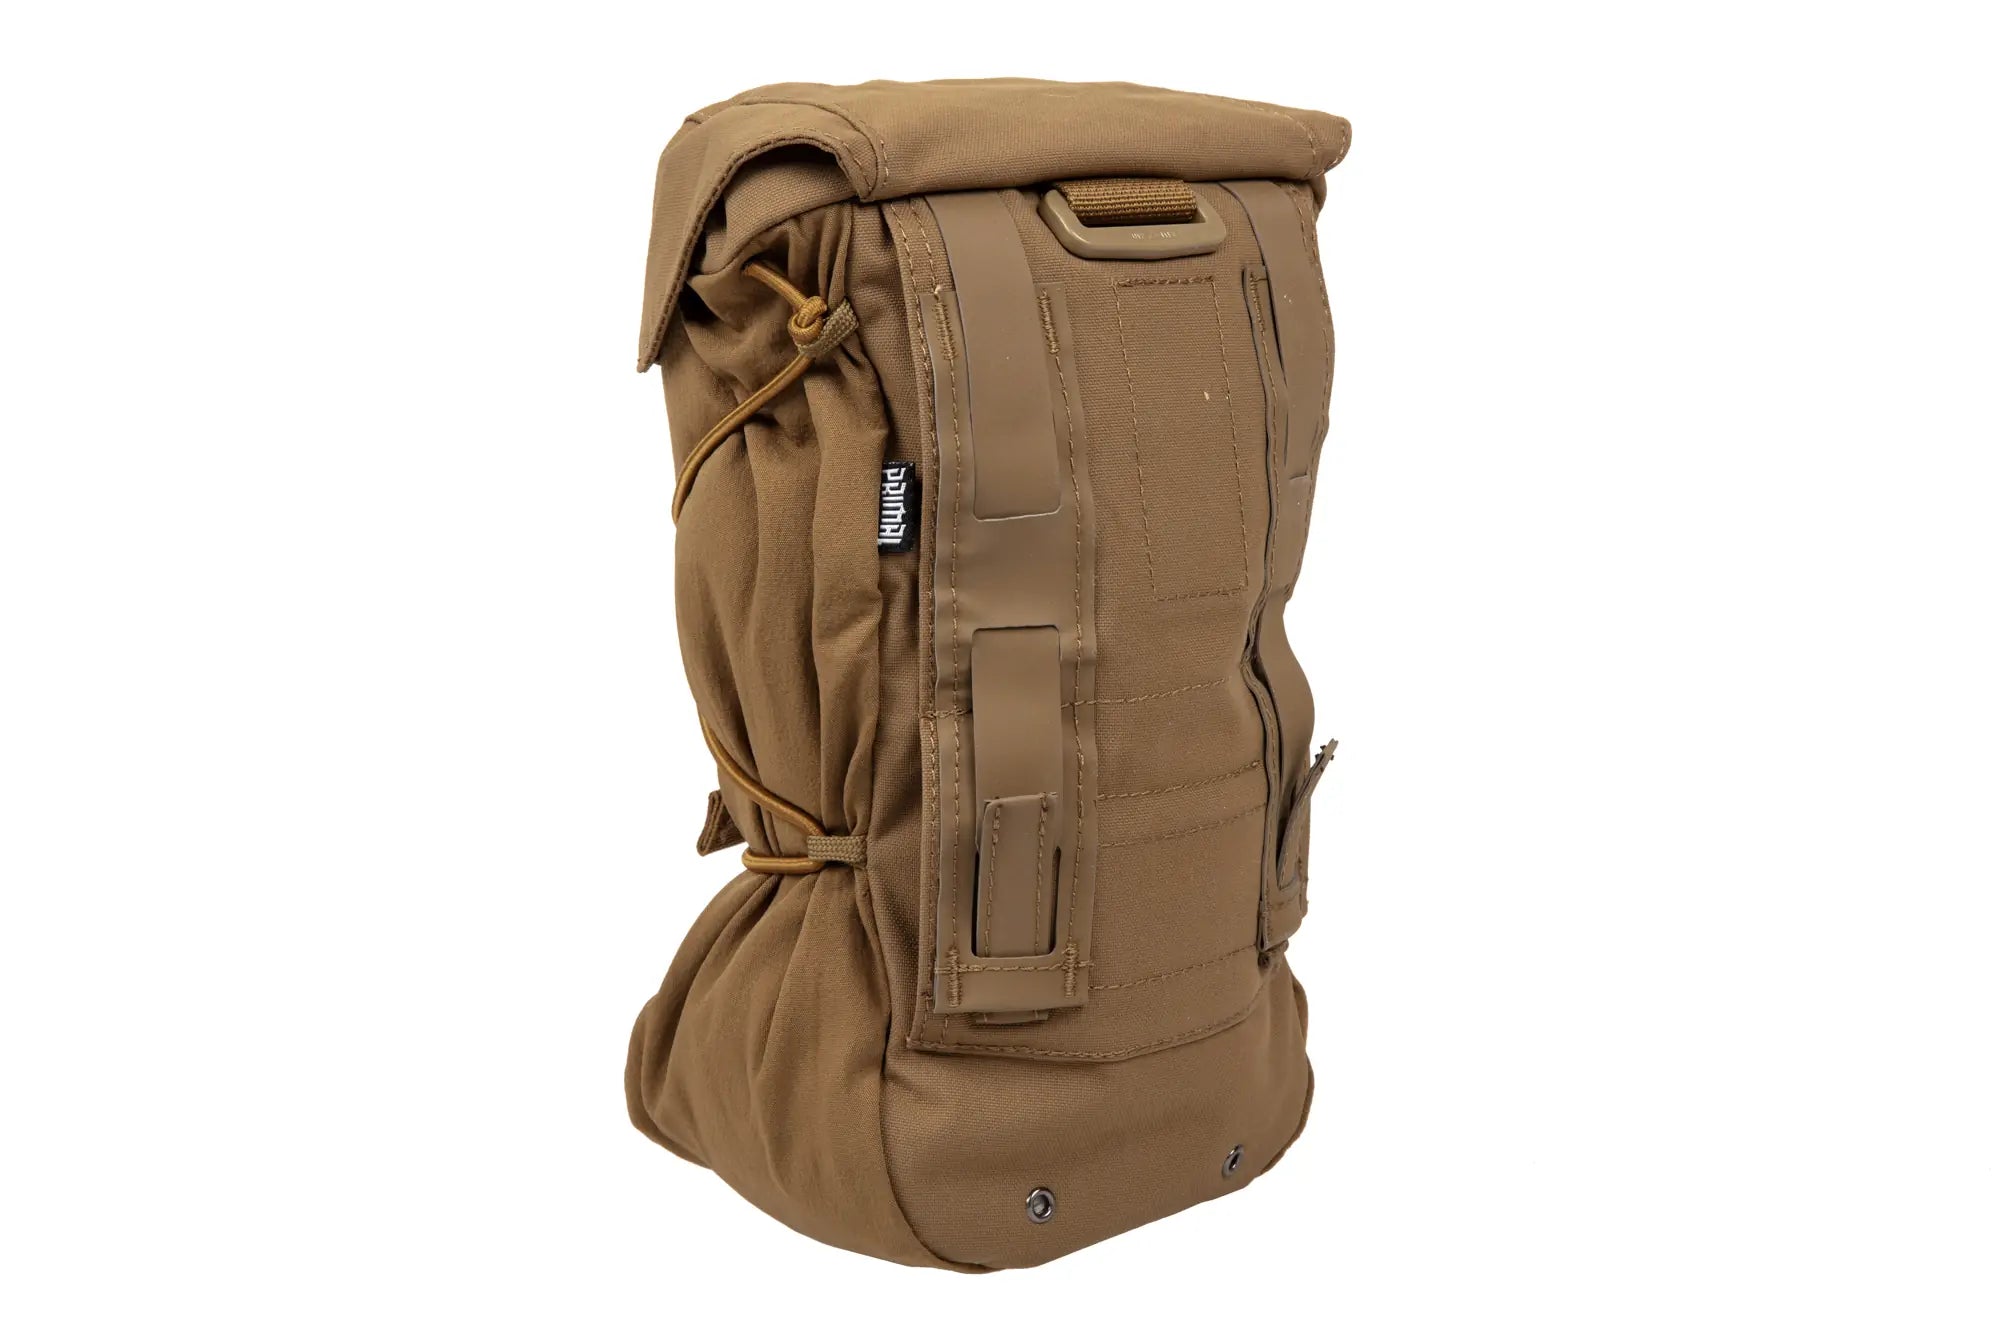 Chelon multifunctional accessory pocket - Coyote Brown-2